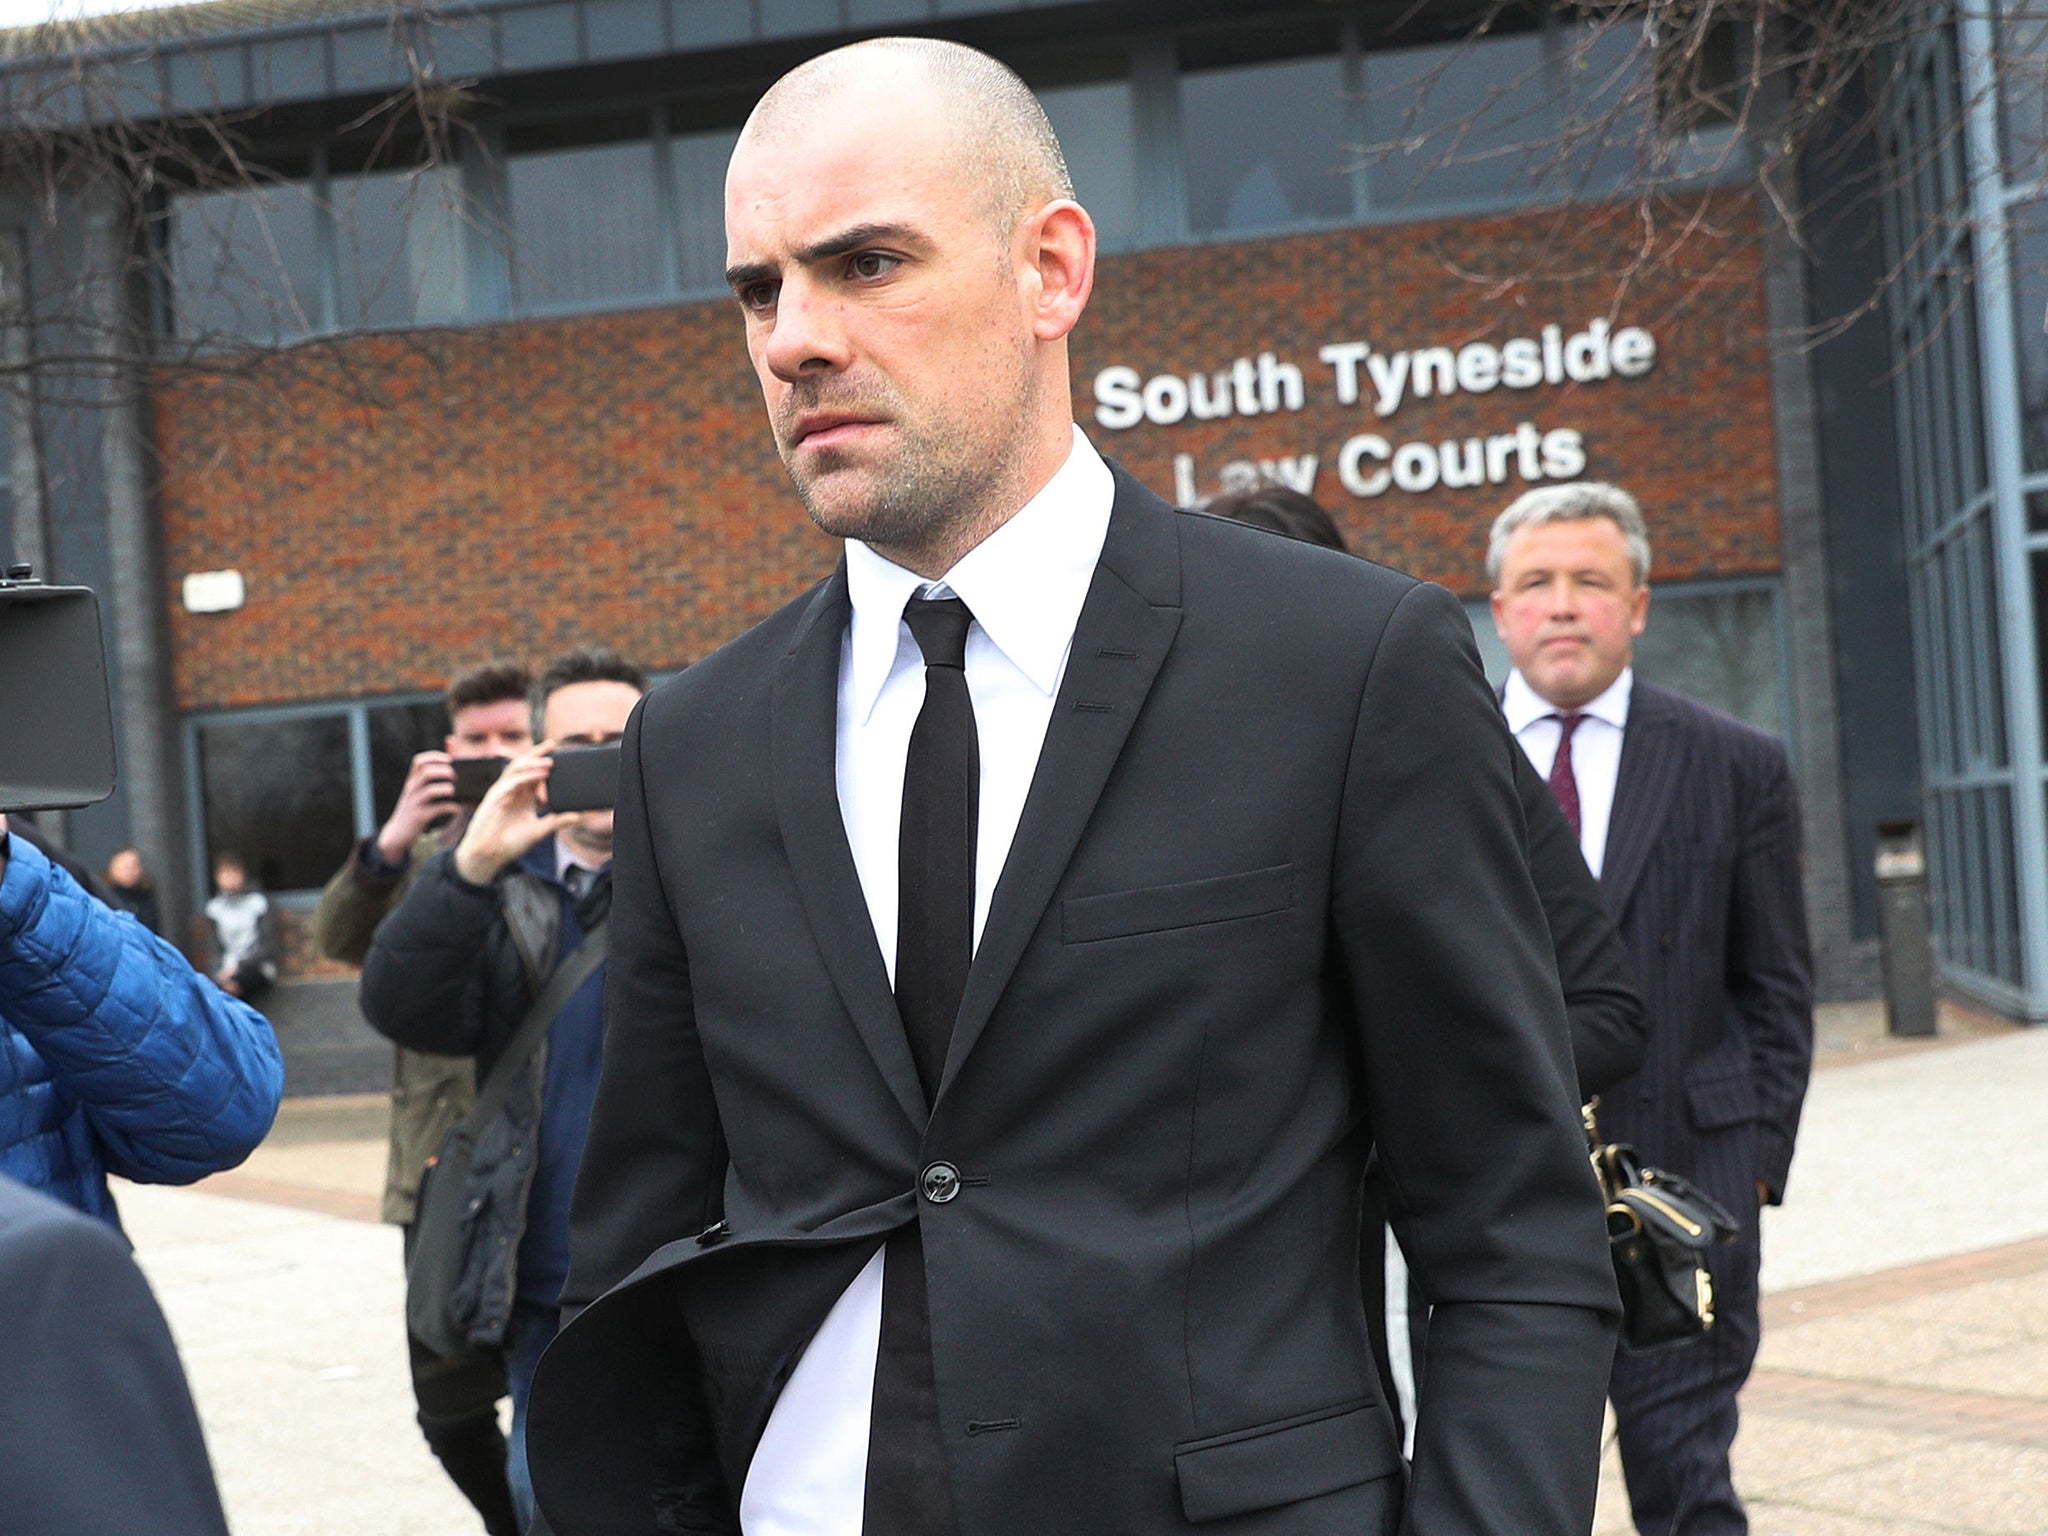 Darron Gibson has been told he faces a jail sentence after pleading guilty to drink-driving